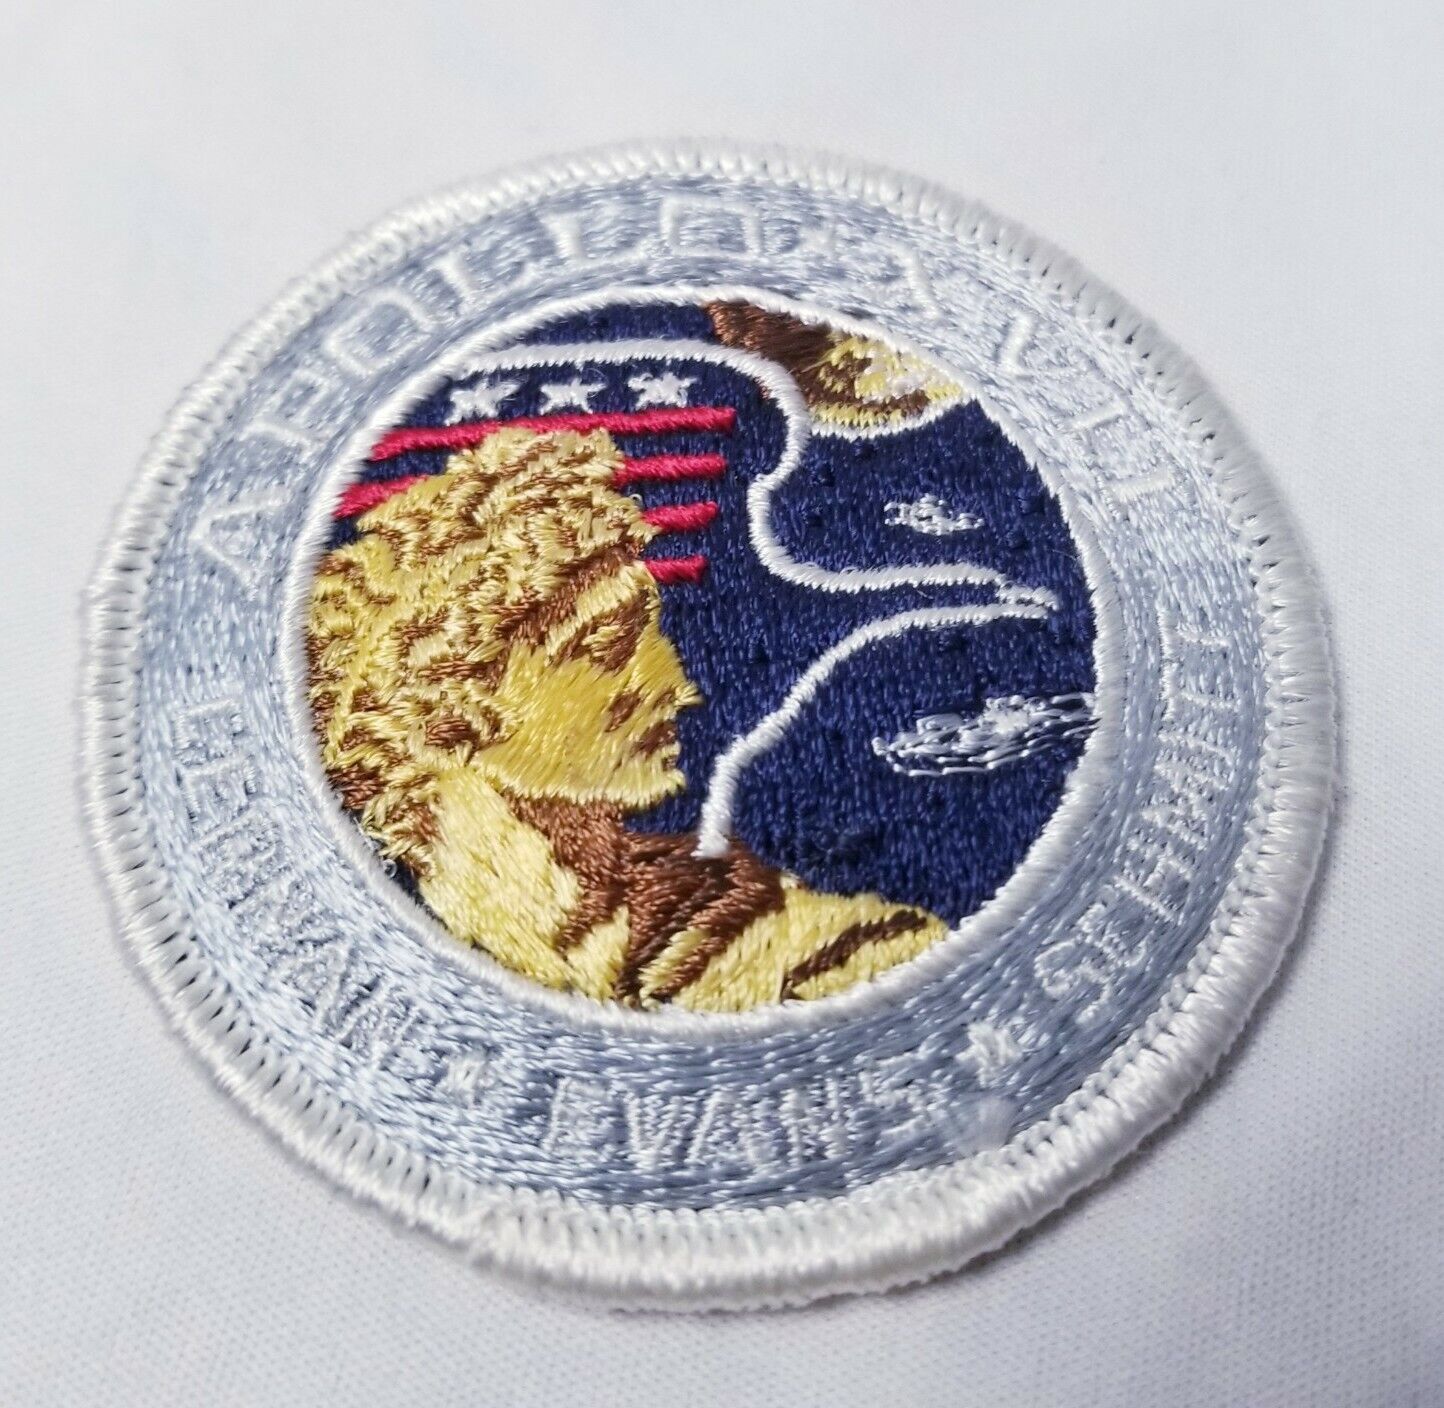 NASA APOLLO 17 XVII MISSION CREW PATCH Official Authentic SPACE 4.2in USA